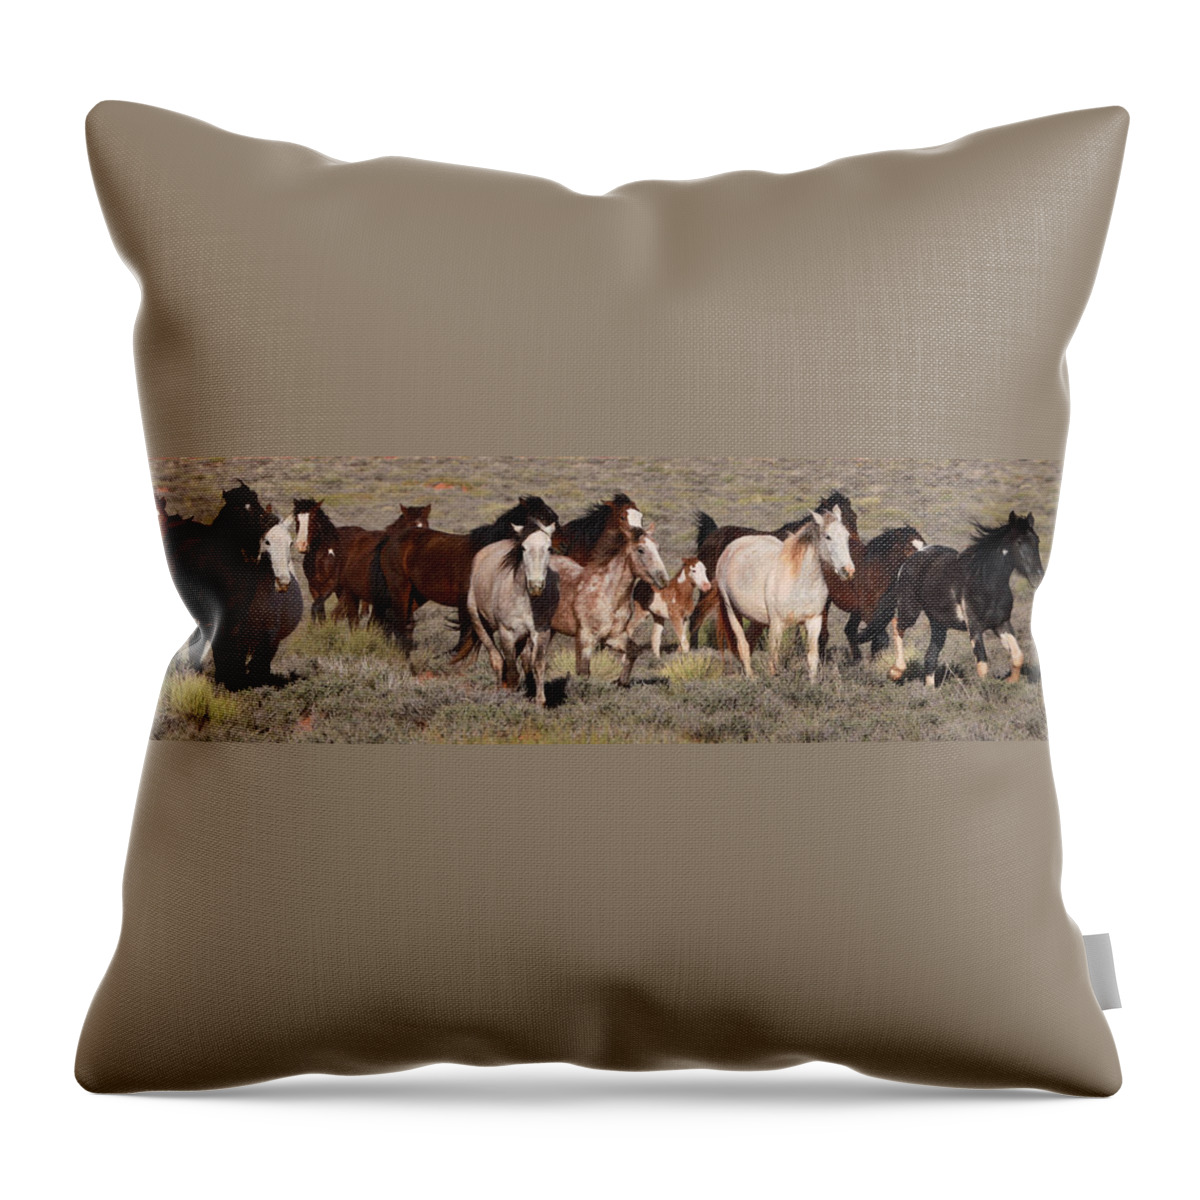 Mustangs Monument 2012 Throw Pillow featuring the photograph High Desert Horses by Diane Bohna